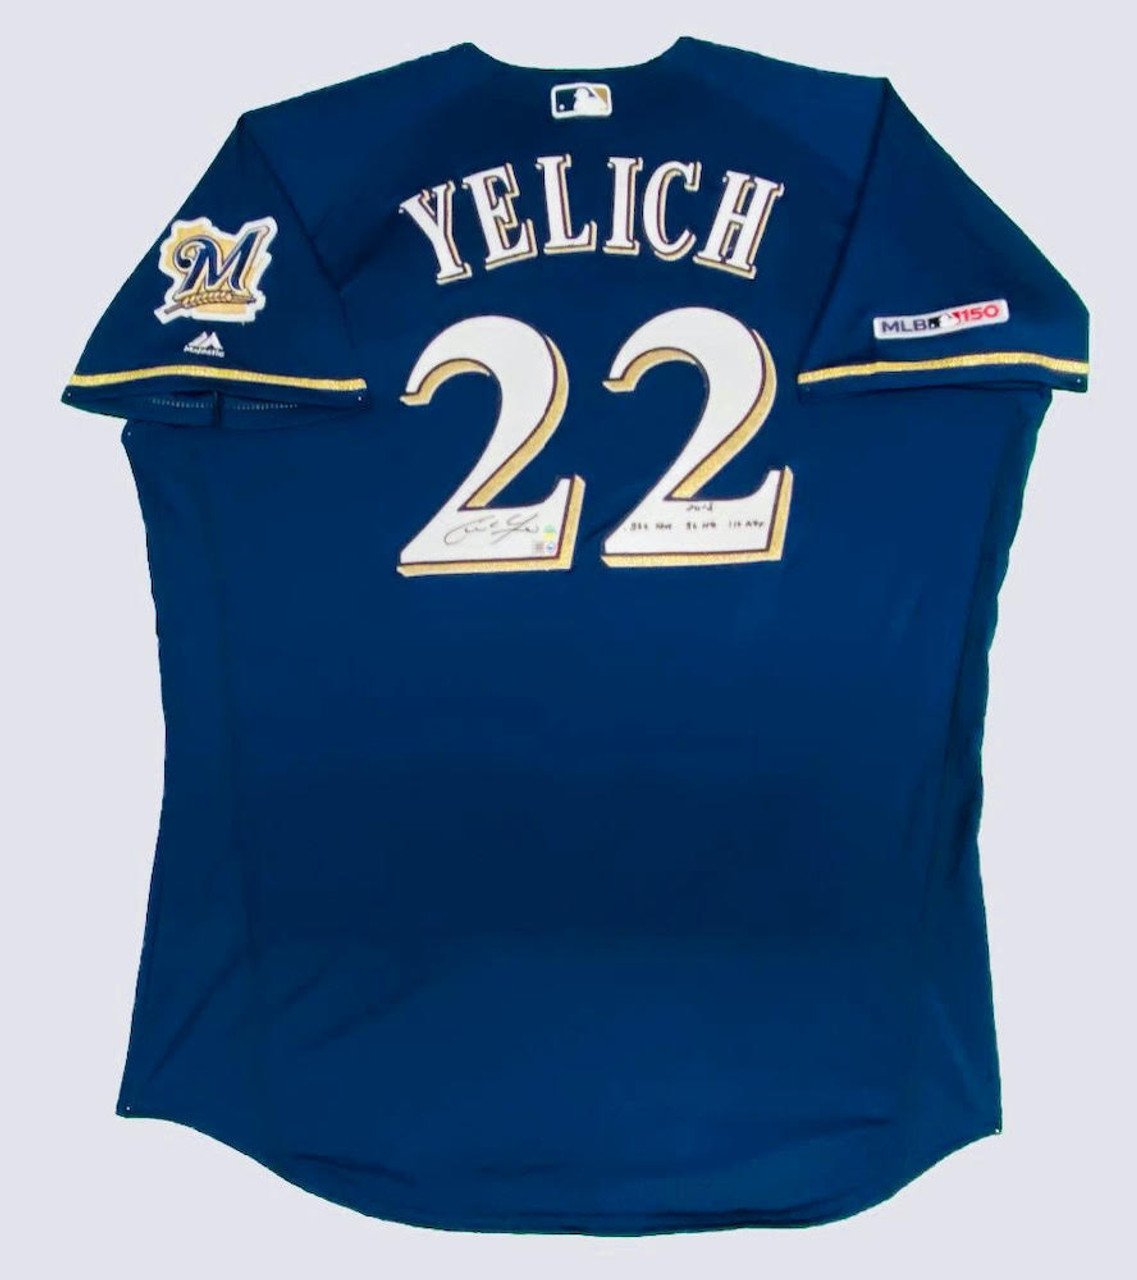 CHRISTIAN YELICH Autographed '2018 Stat' Authentic Blue Brewers